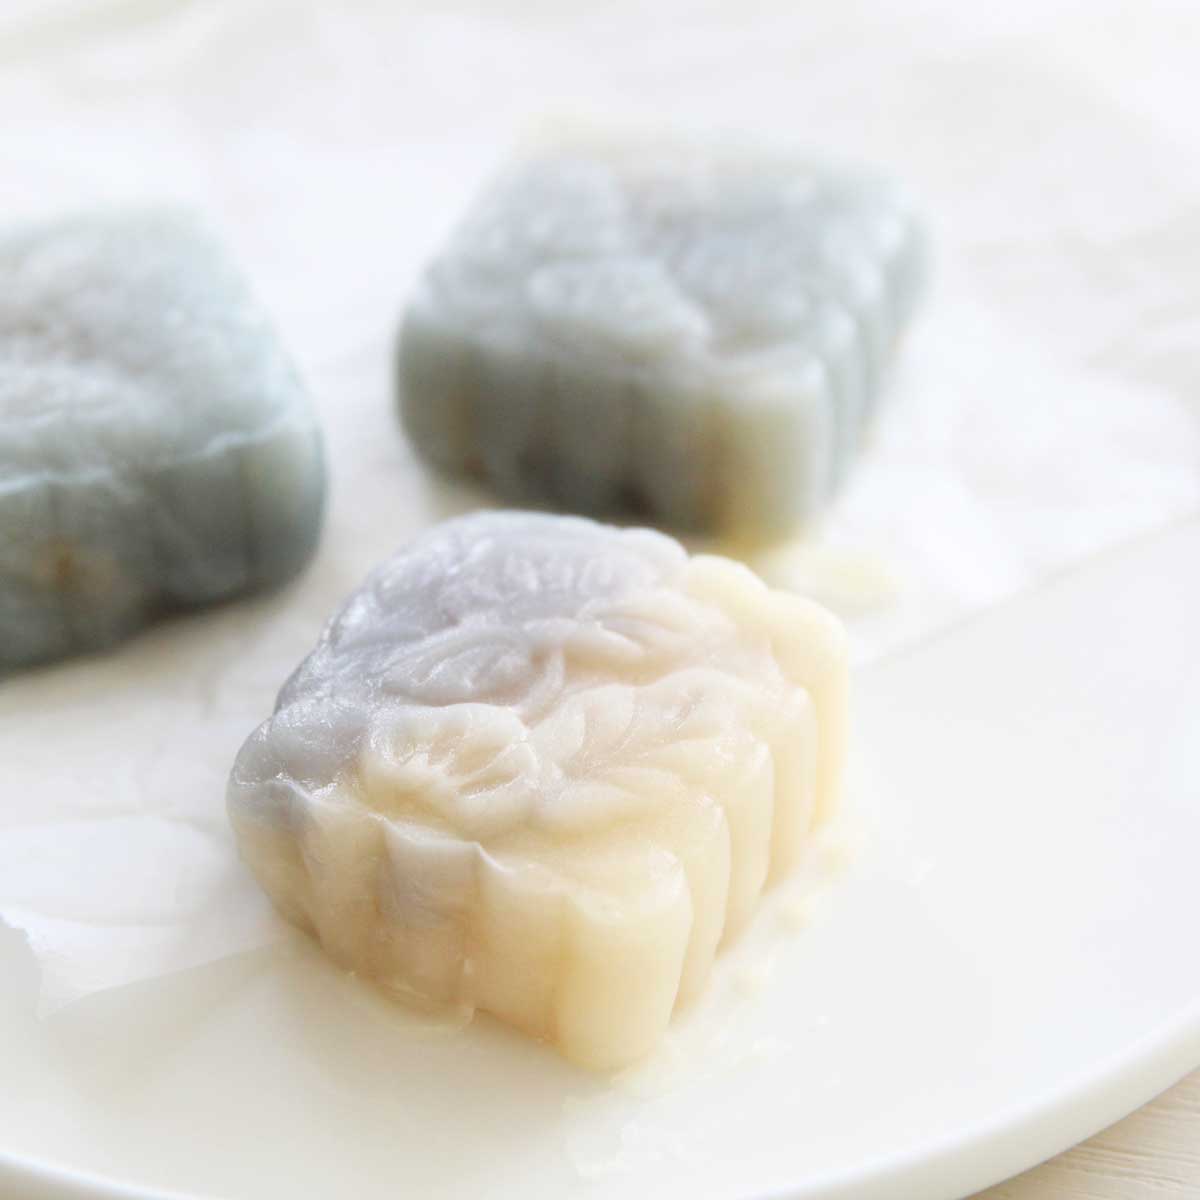 10 Minute Butterfly Pea Snowskin Mooncakes (No Steaming Required!) - vegan cheesecake